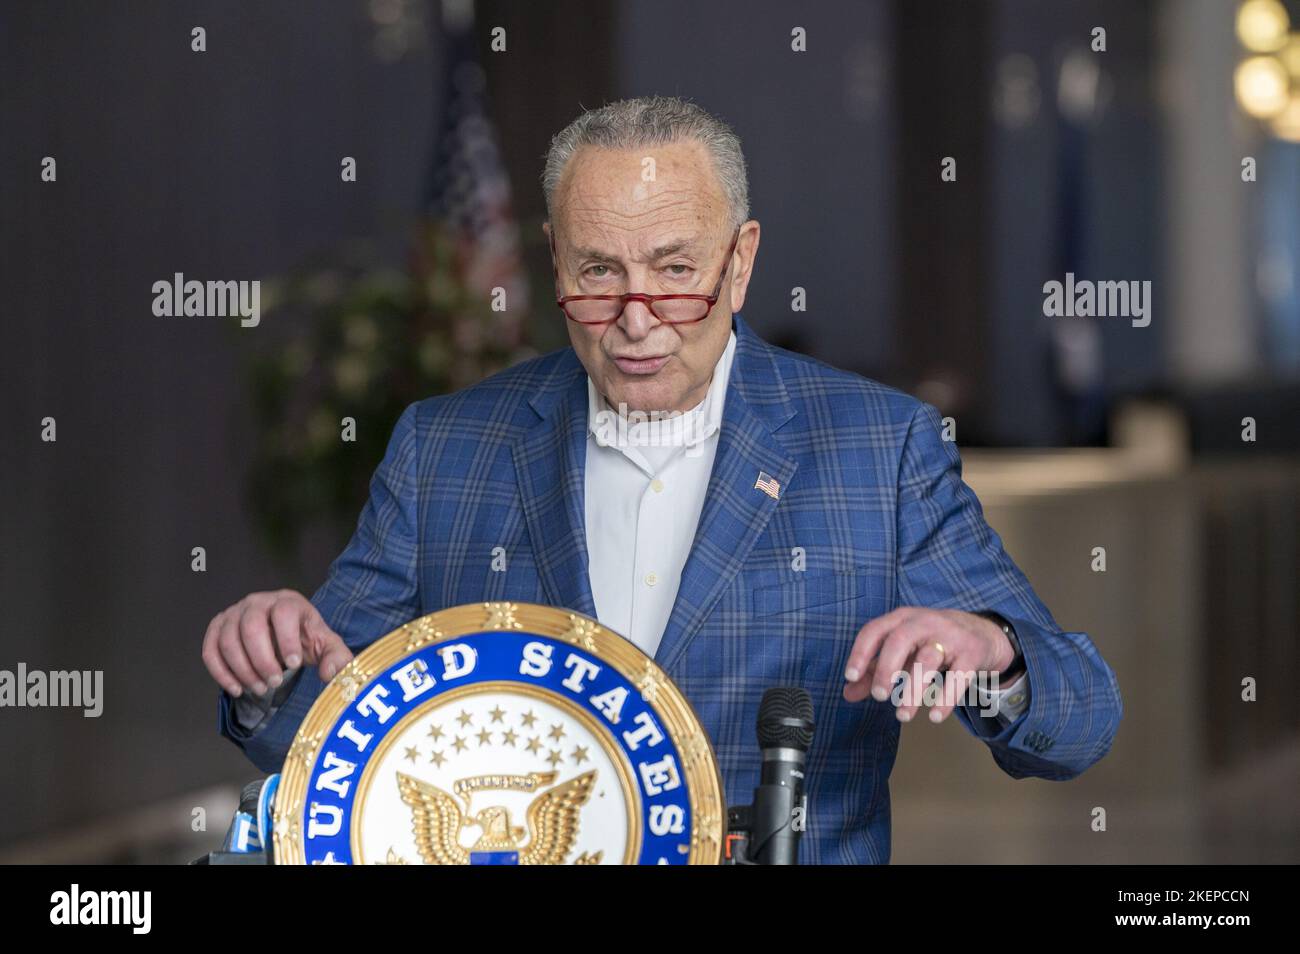 New York, New York, USA. 13th Nov, 2022. (NEW) Senator Schumer's Remarks After Democrats Keep Control Of Senate. November 13, 2022, New York, USA: Senate Majority Leader, U.S. Senator Chuck Schumer (D-NY) speaks to press after democrats keep control of senate on November 13, 2022 in New York City. Senator Schumer called the midterm elections ''a victory and a vindication'' for Democrats after the results of the Nevada U.S. Senate race handed control back to the party. The fate of the House was still uncertain as the GOP struggled to pull together a slim majority there. (Credit Im Stock Photo